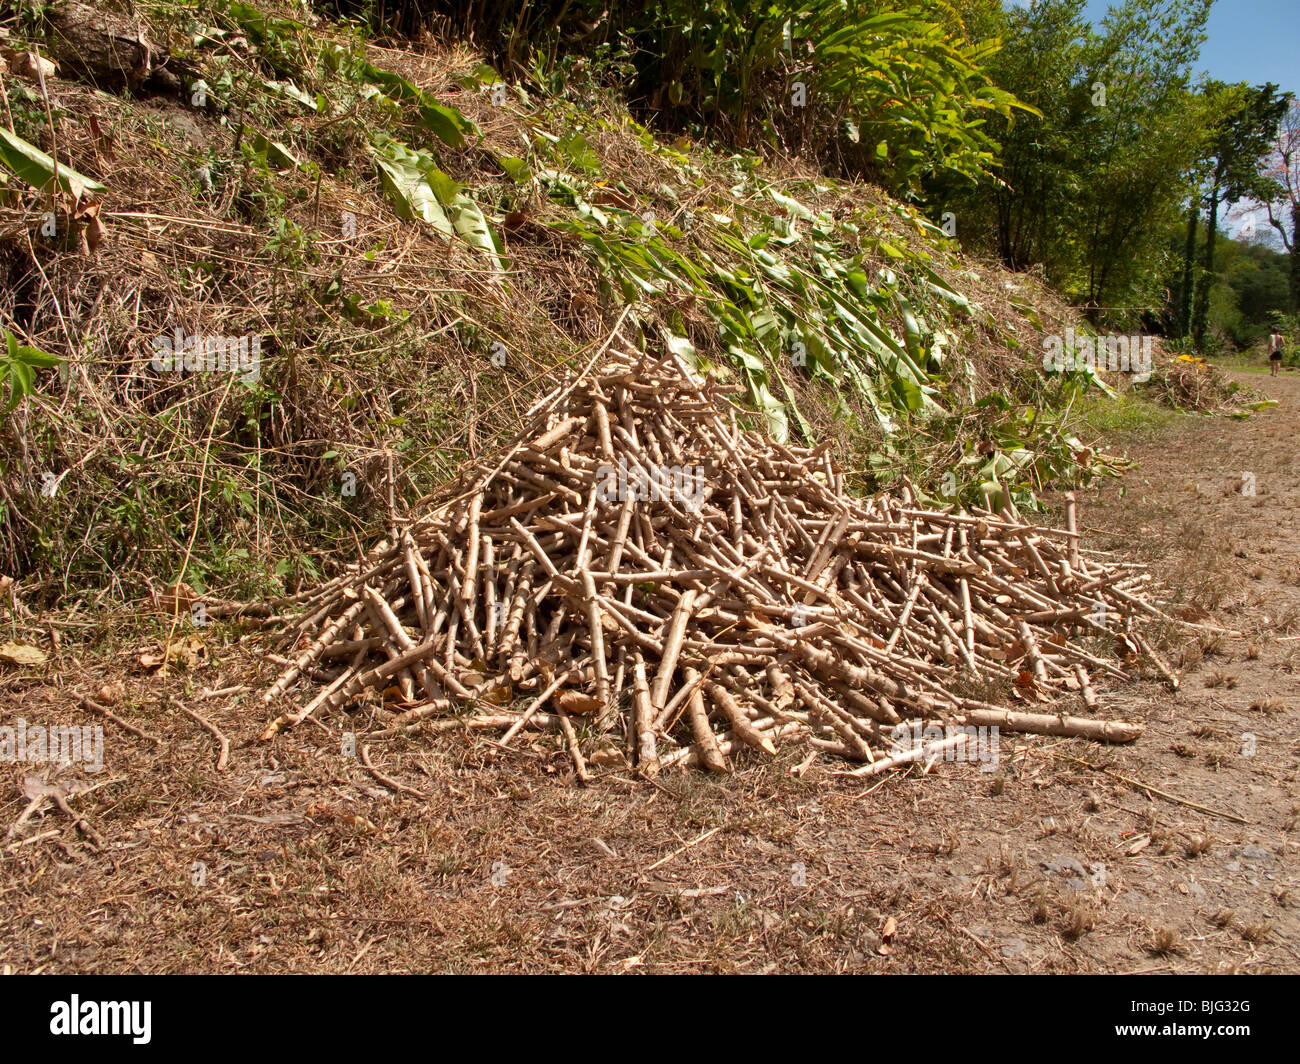 A pile of cassava stems awaiting by the side field for planting near the rainforest, Tobago West Indies Stock Photo